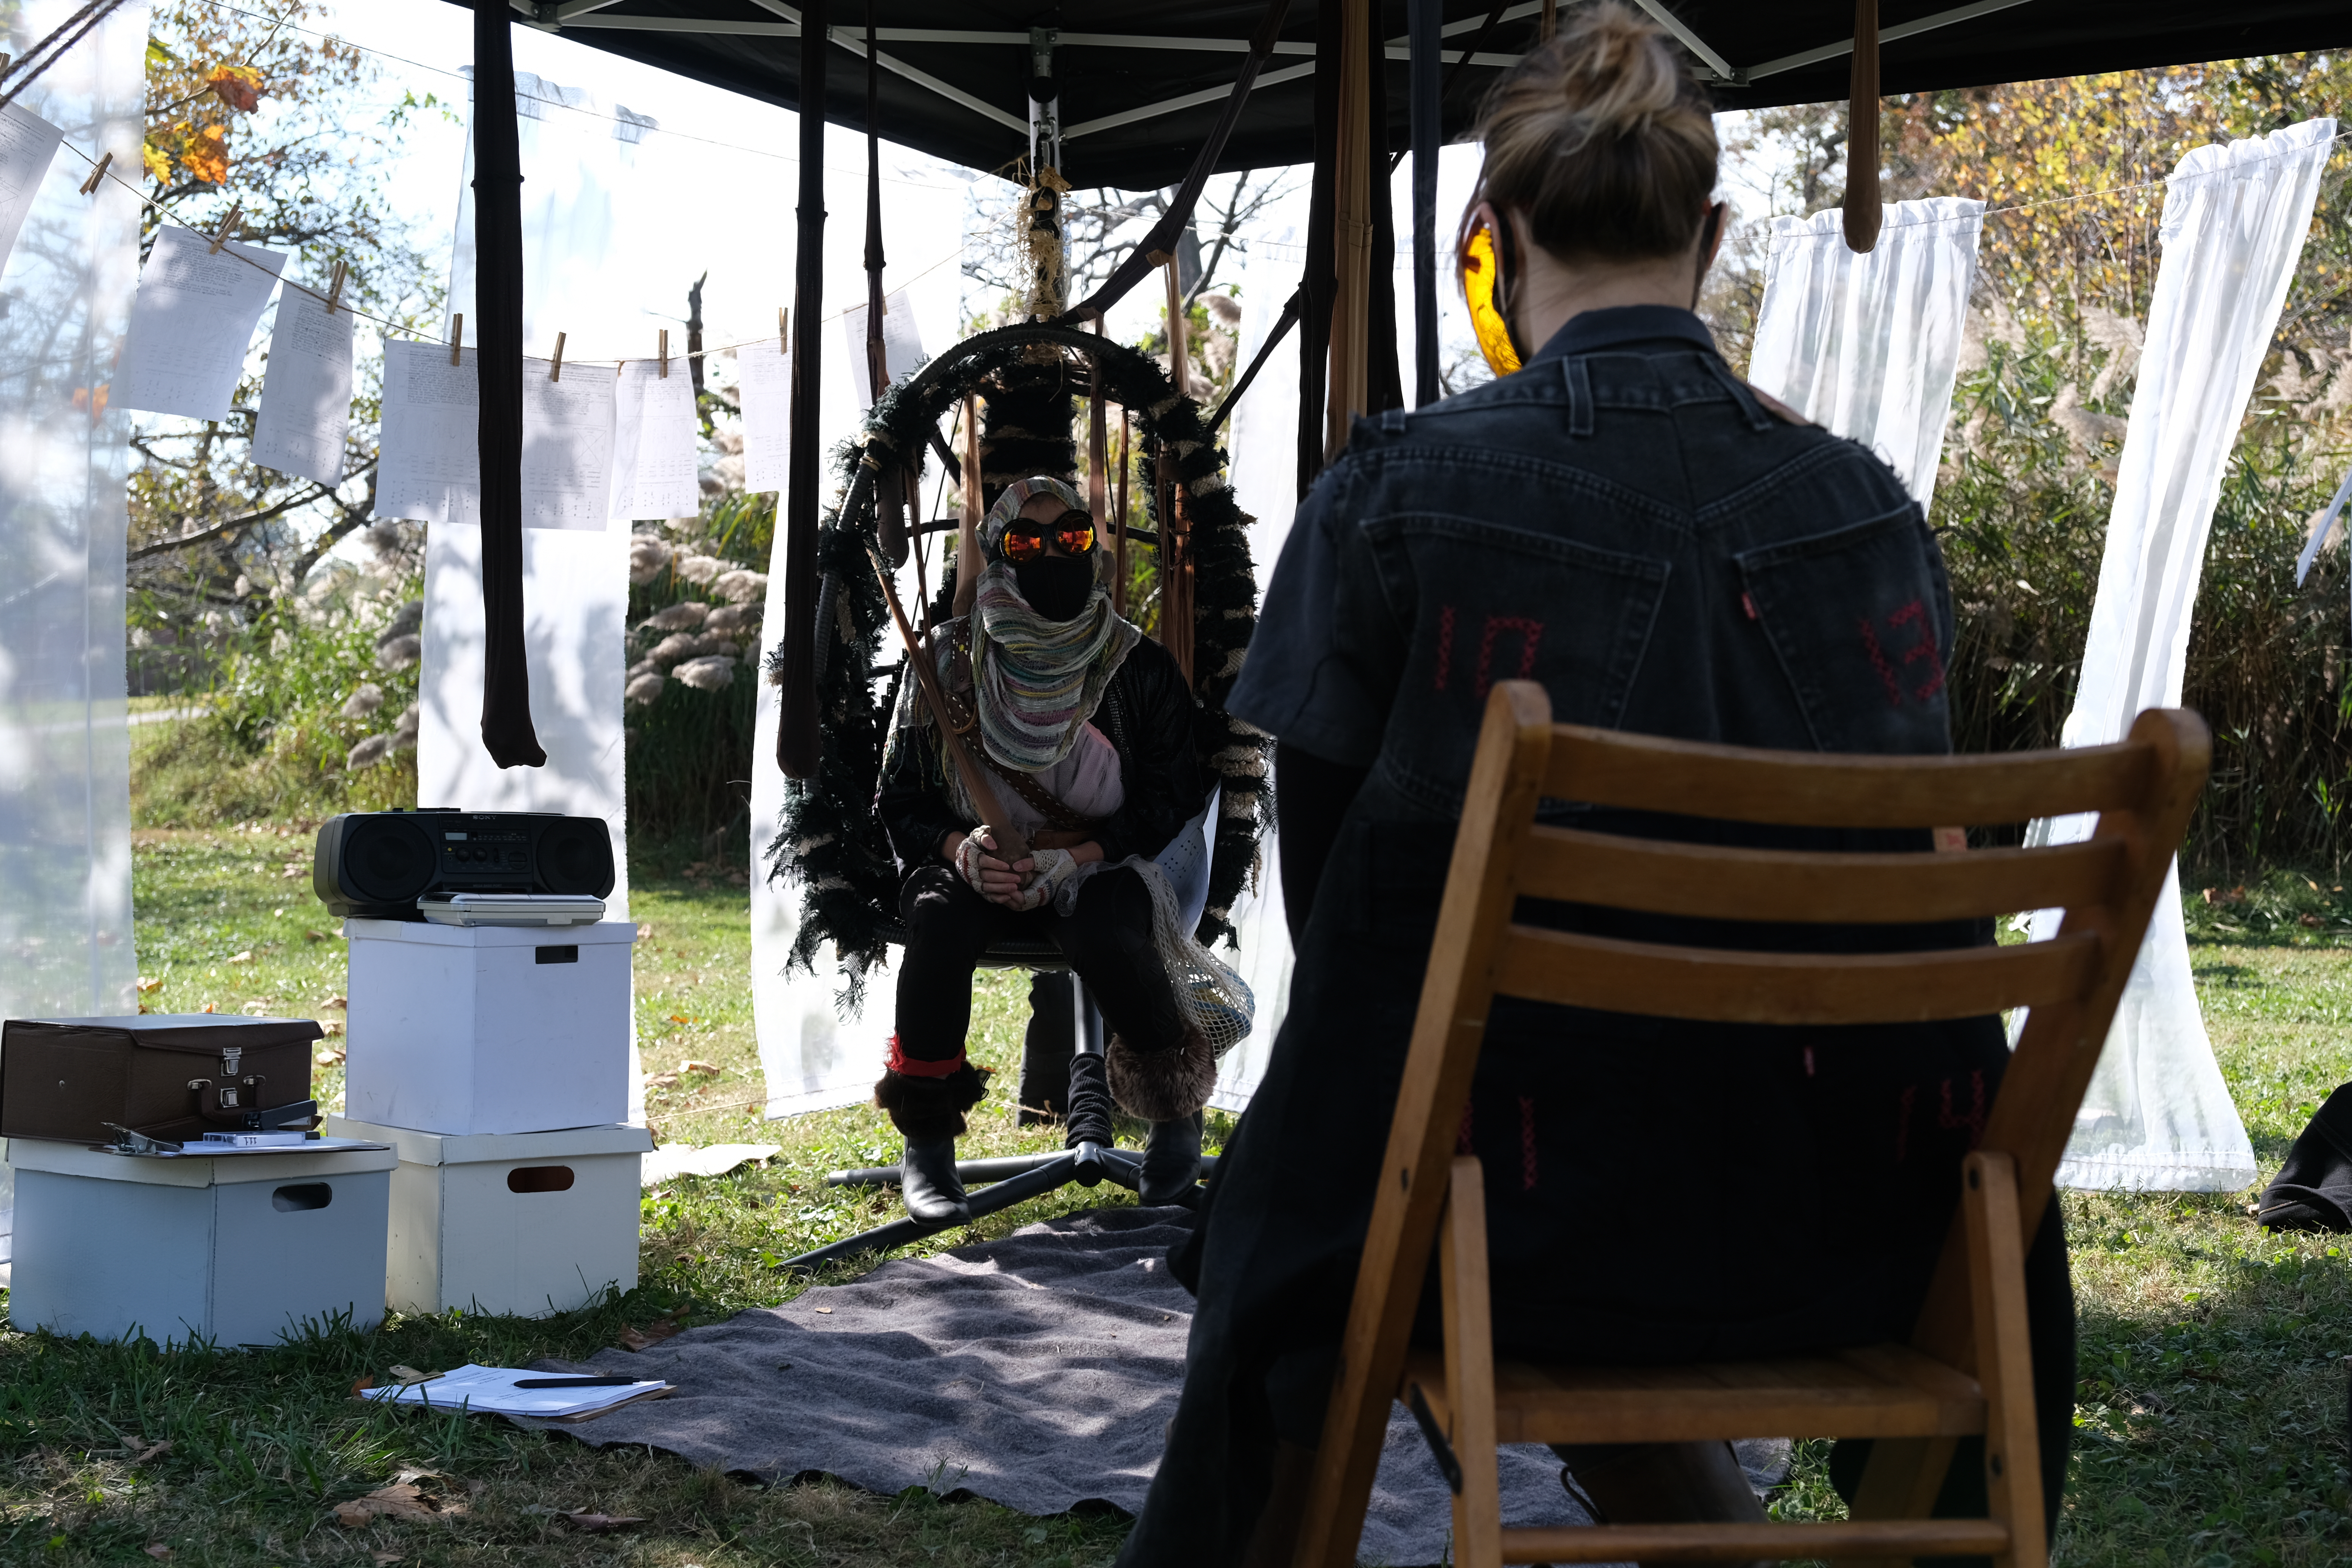 Performers Jessie Delaplaine and Martha Roubichaud using the Empathy Apparatus inside the Temporal Rift in the performance of rECHOllection in Druid Hill Park